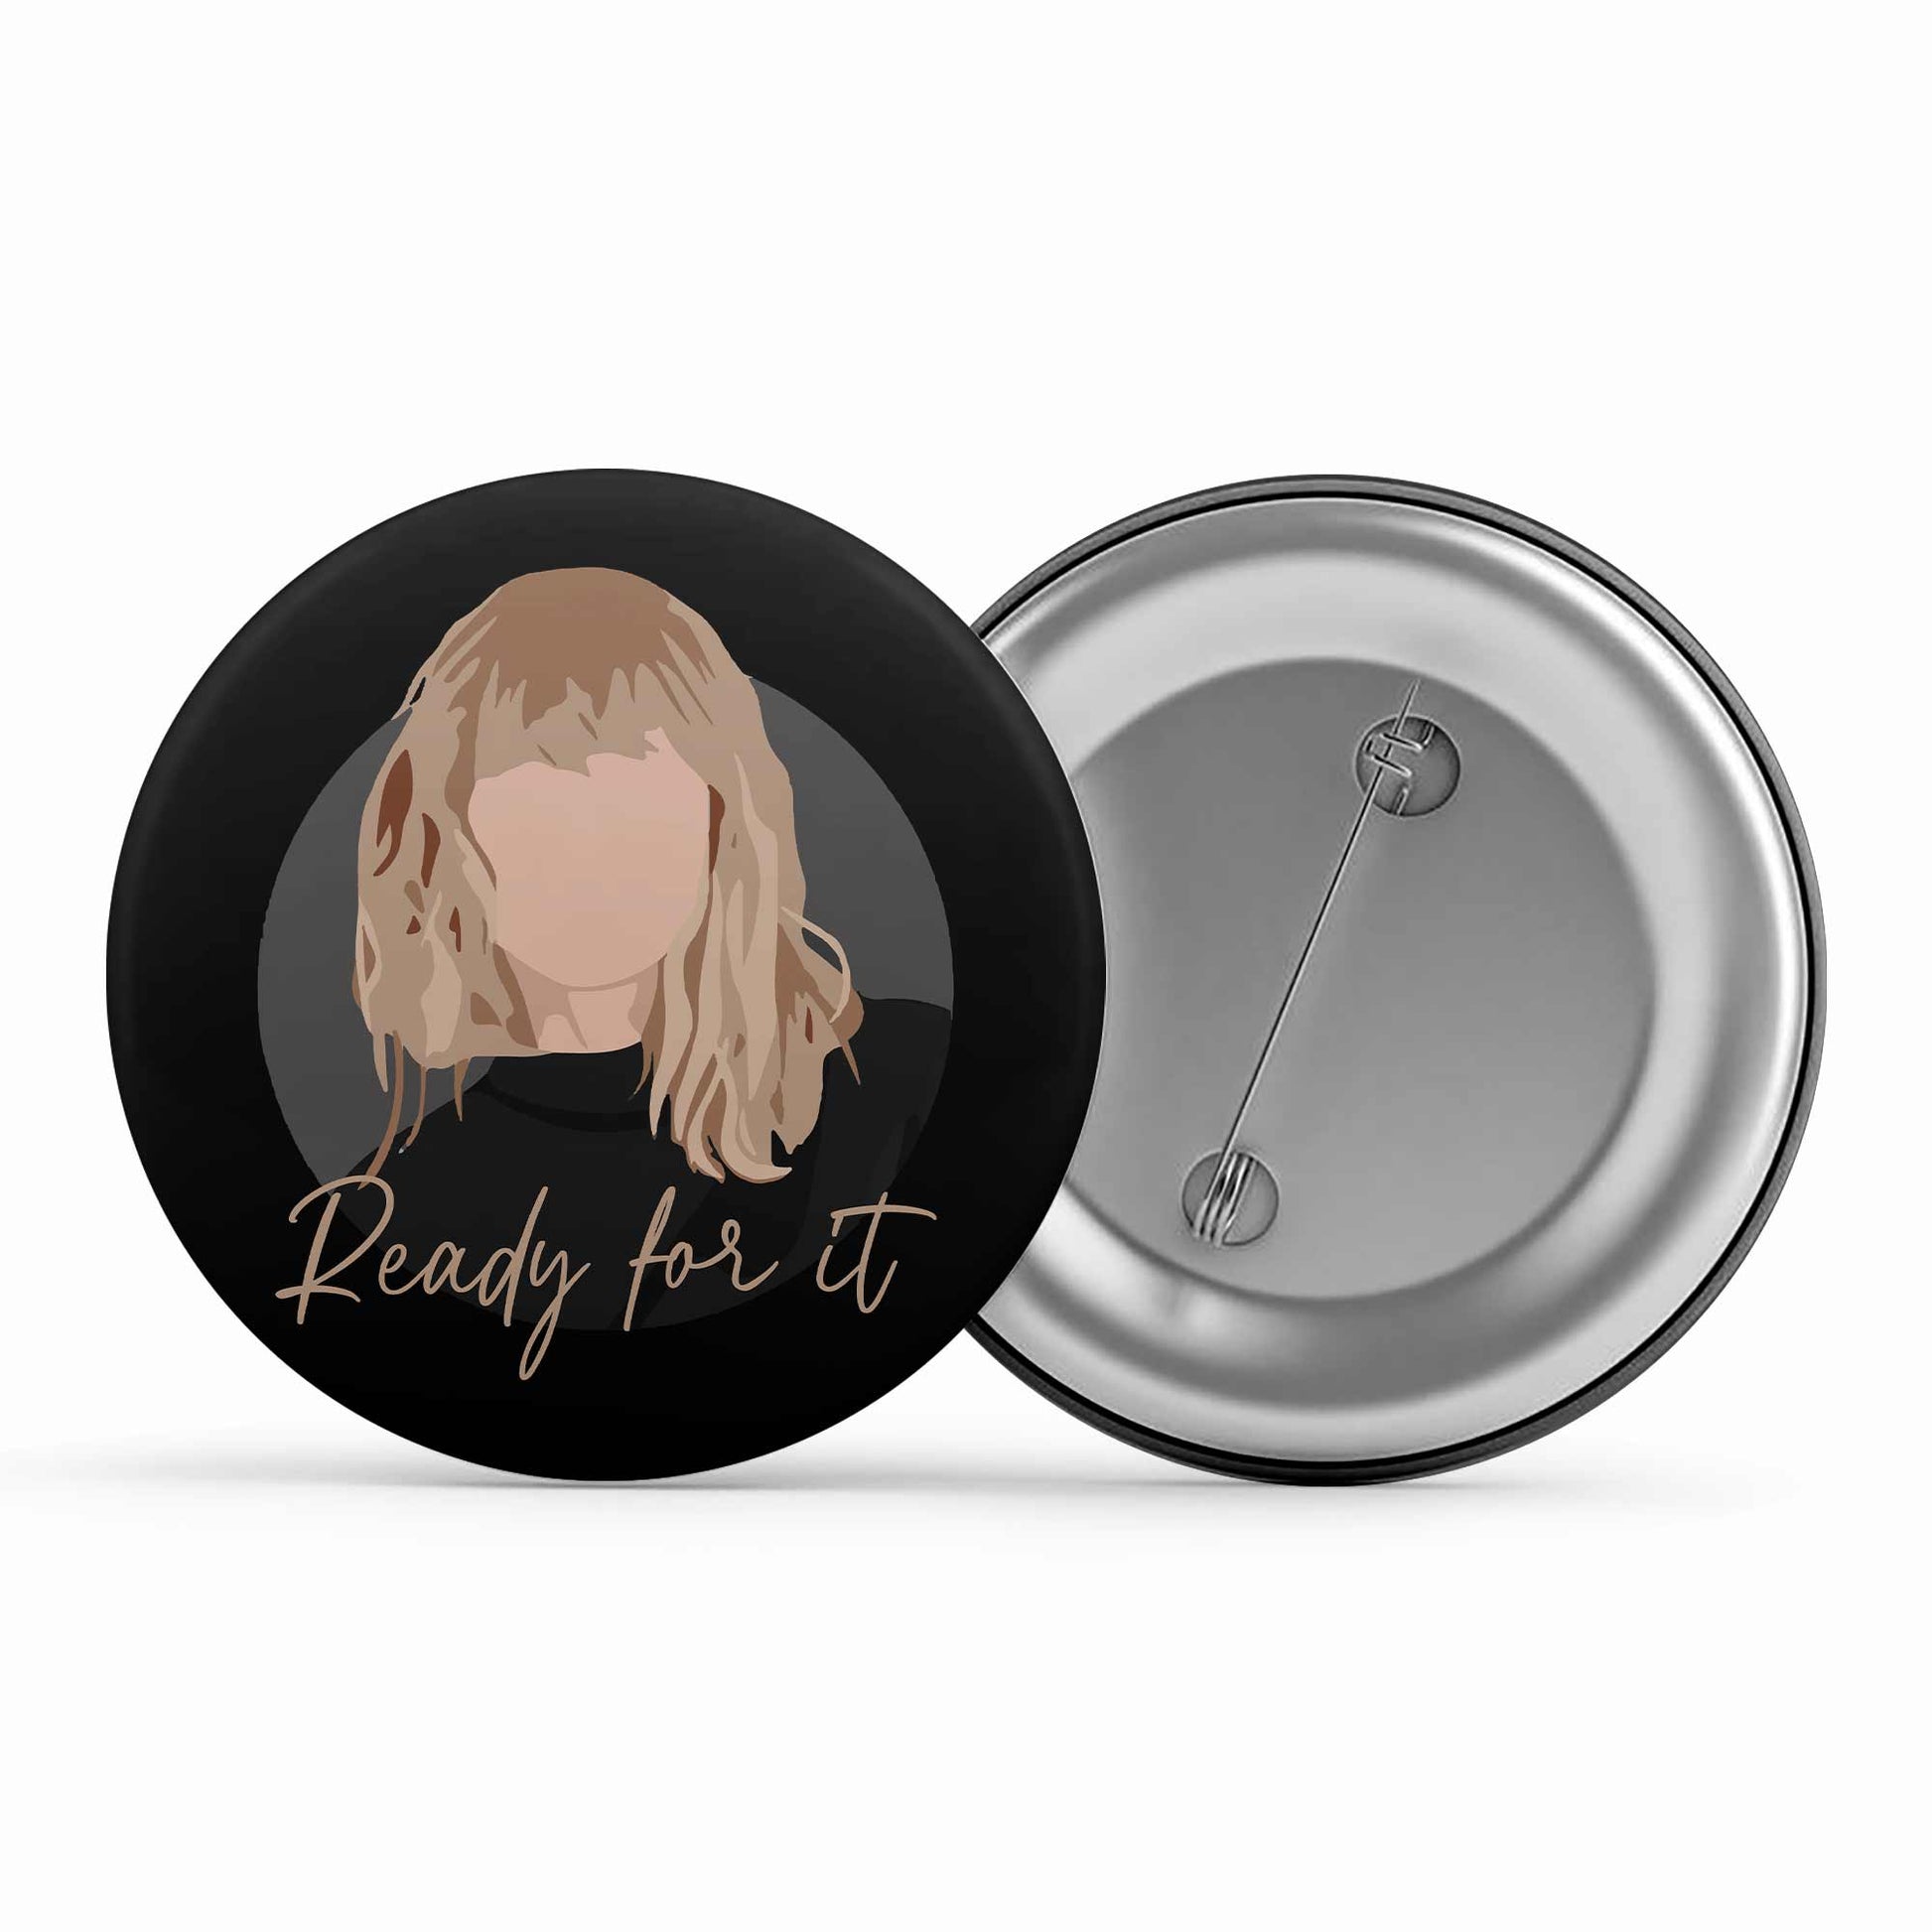 Buy Taylor Swift Pin Button - Ready For It at 5% OFF 🤑 – The Banyan Tee